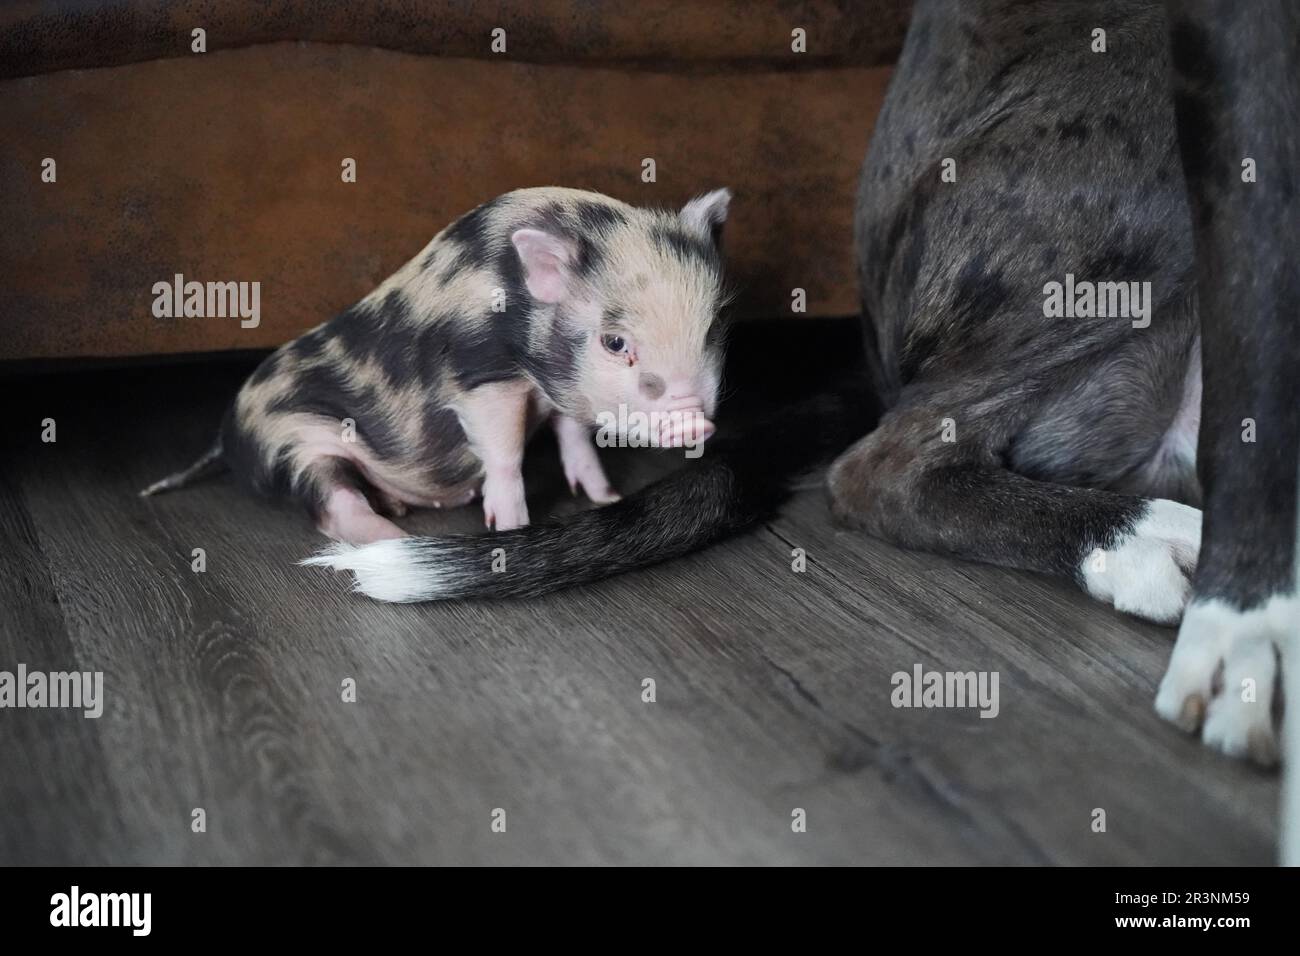 Great Dane - Boxer mix Floki and the little baby mini pig Stock Photo